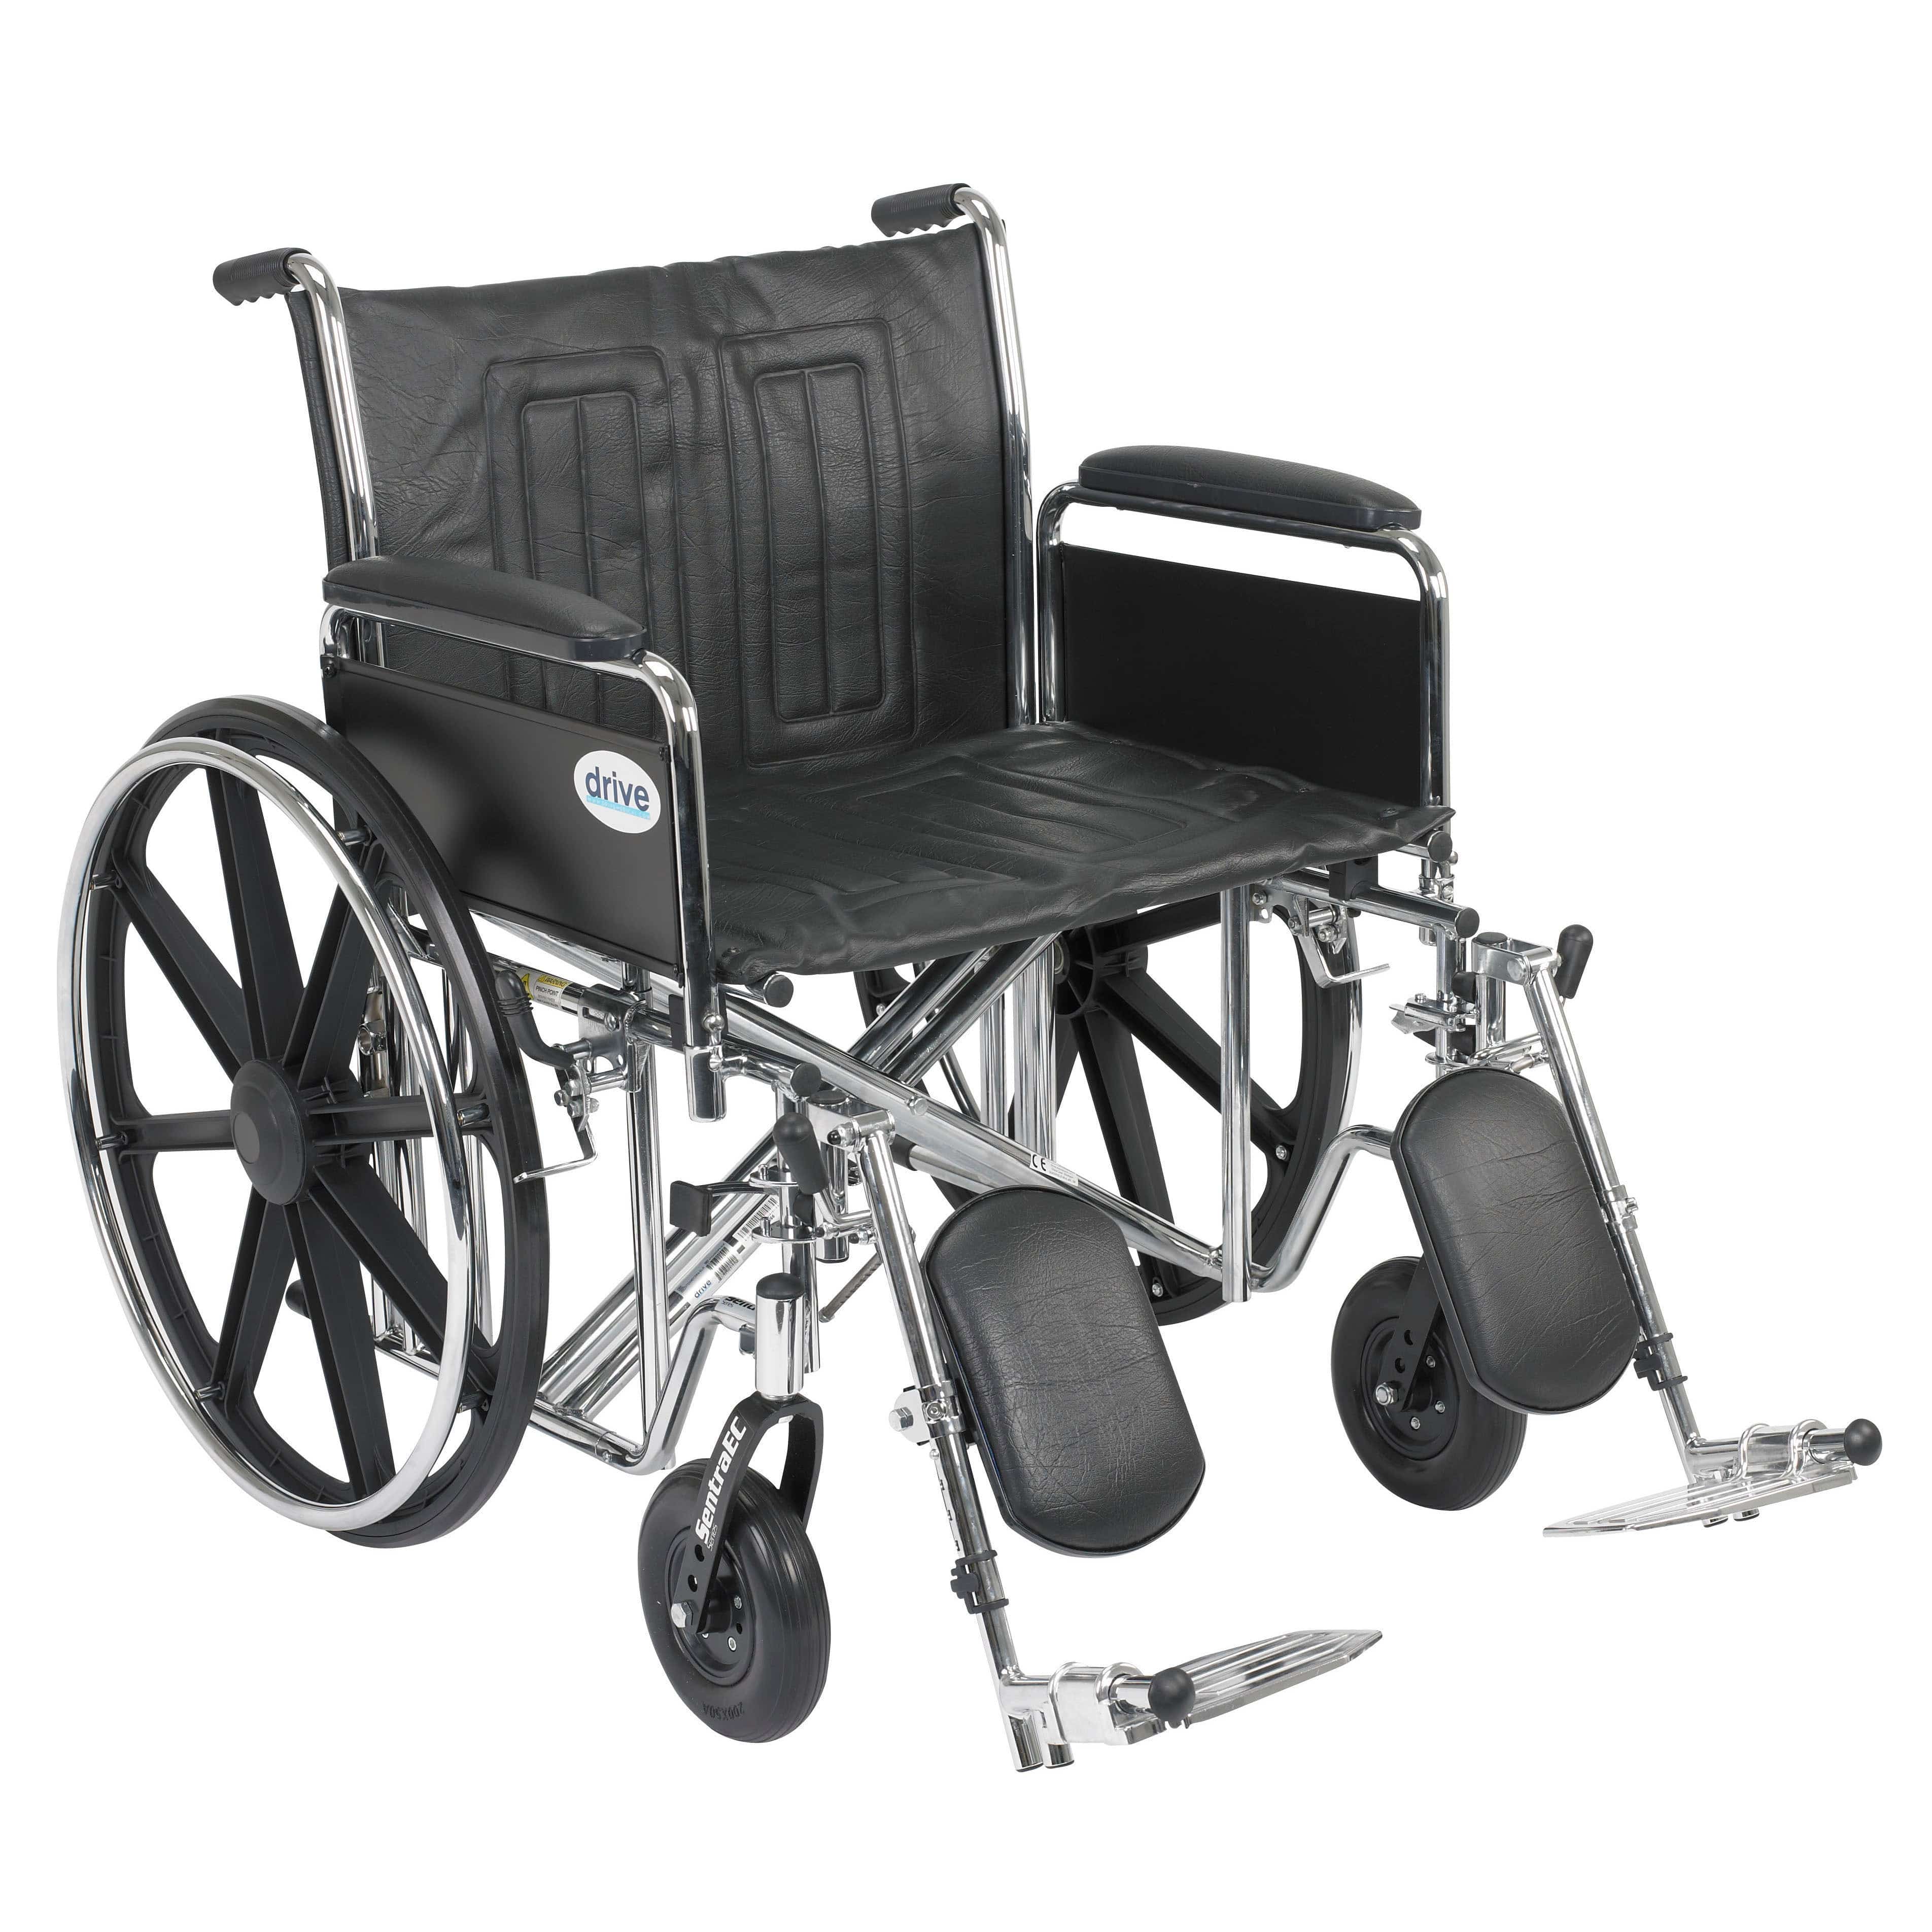 Drive Medical Wheelchairs Detachable Full Arms and Elevating Leg Rests / 24" Seat Drive Medical Sentra EC Heavy Duty Wheelchair